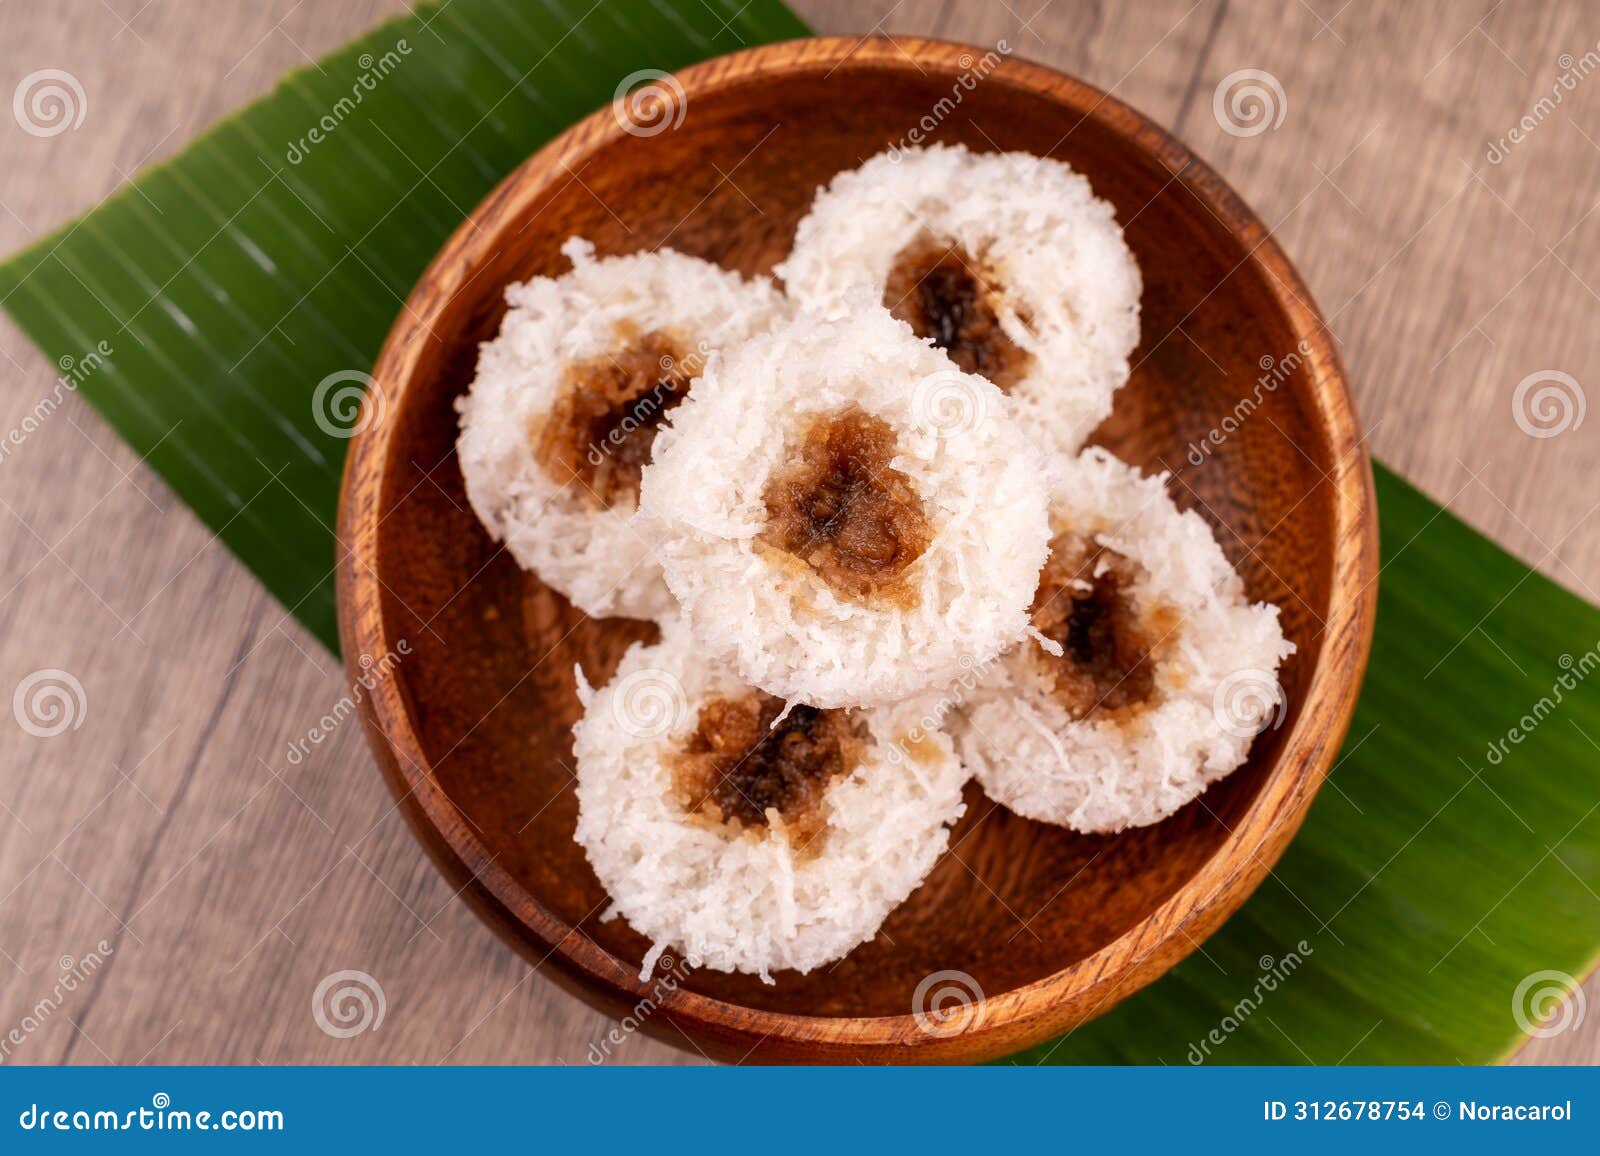 putu bambu or steamed rice flour cake with grated coconut and palm sugar filling